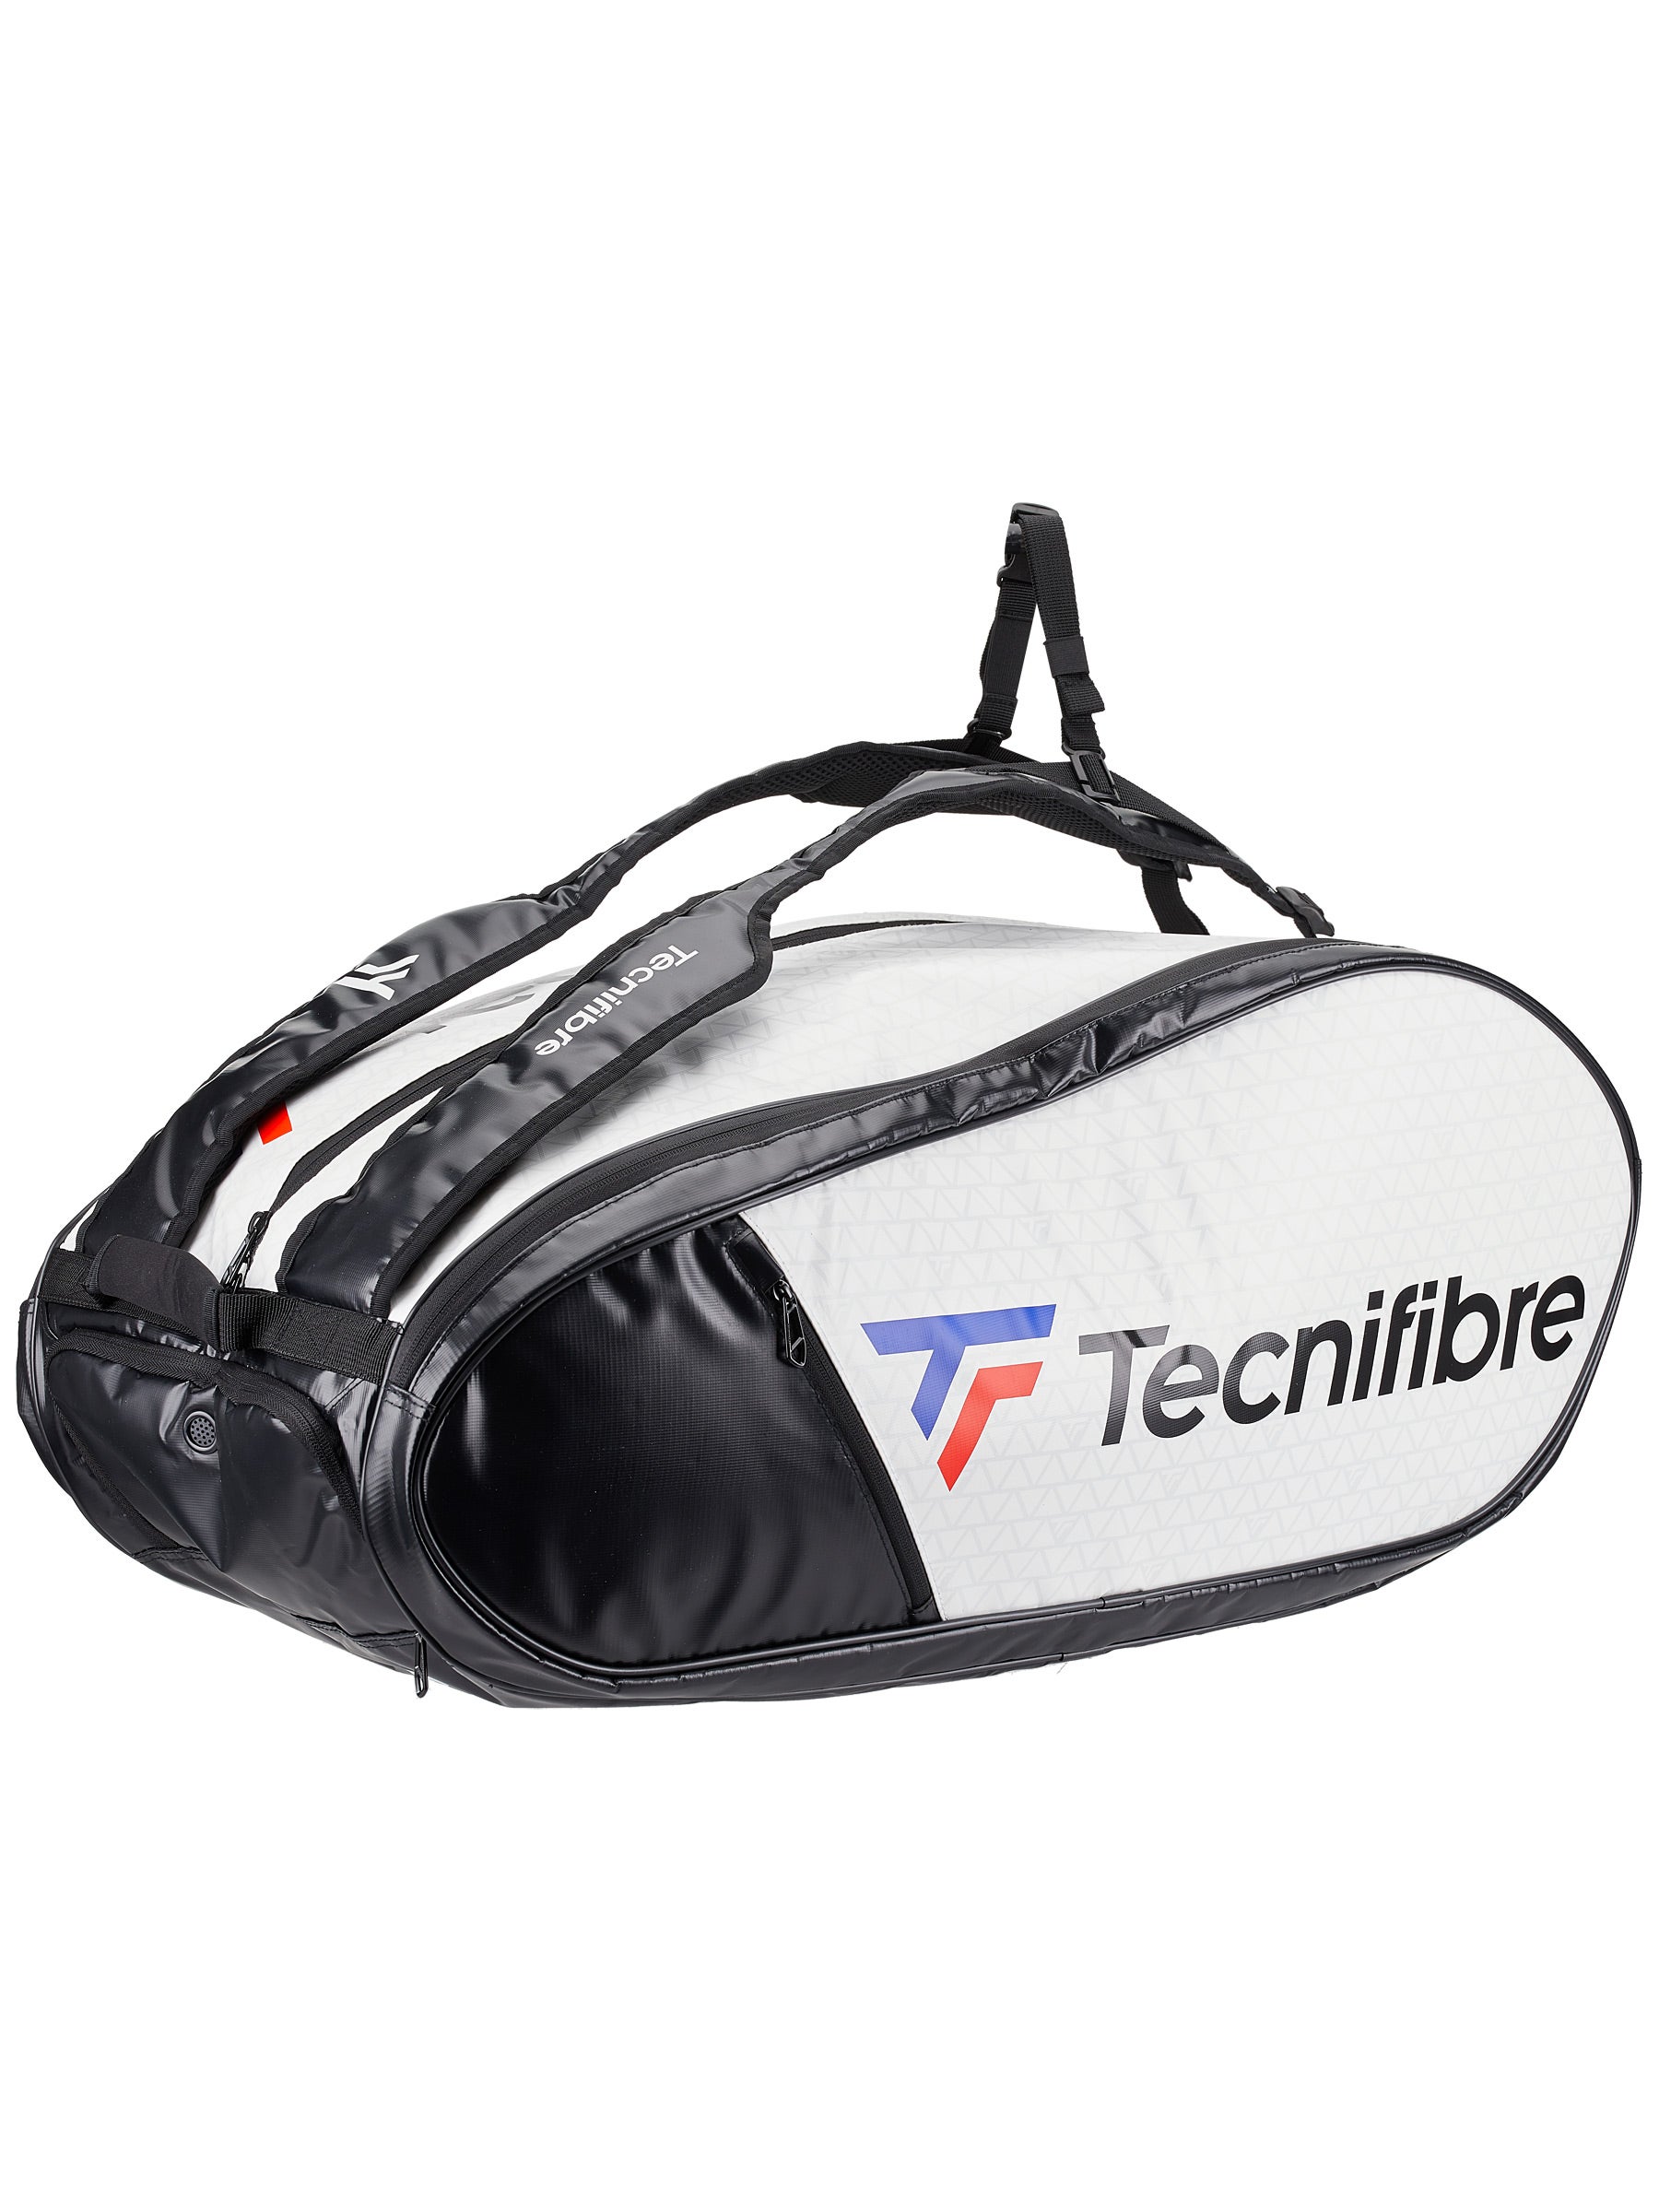 What To Put In Your Tennis Bag? - TENNIS EXPRESS BLOG